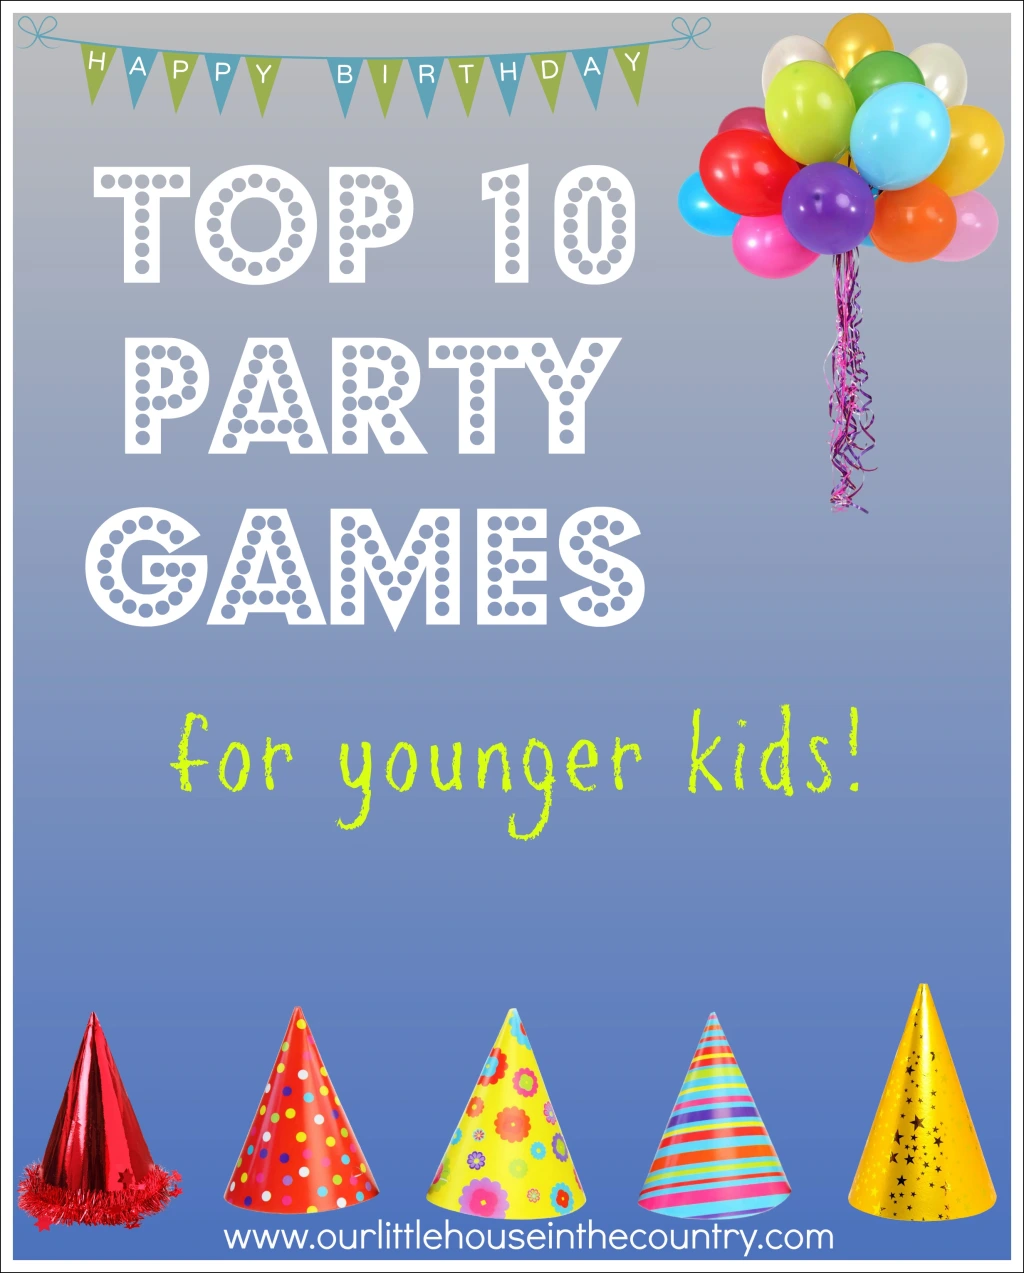 Top 10 Party Games- for younger kids - Our Little House in the Country #partygames #birthdayparty #kids #kidsactivities